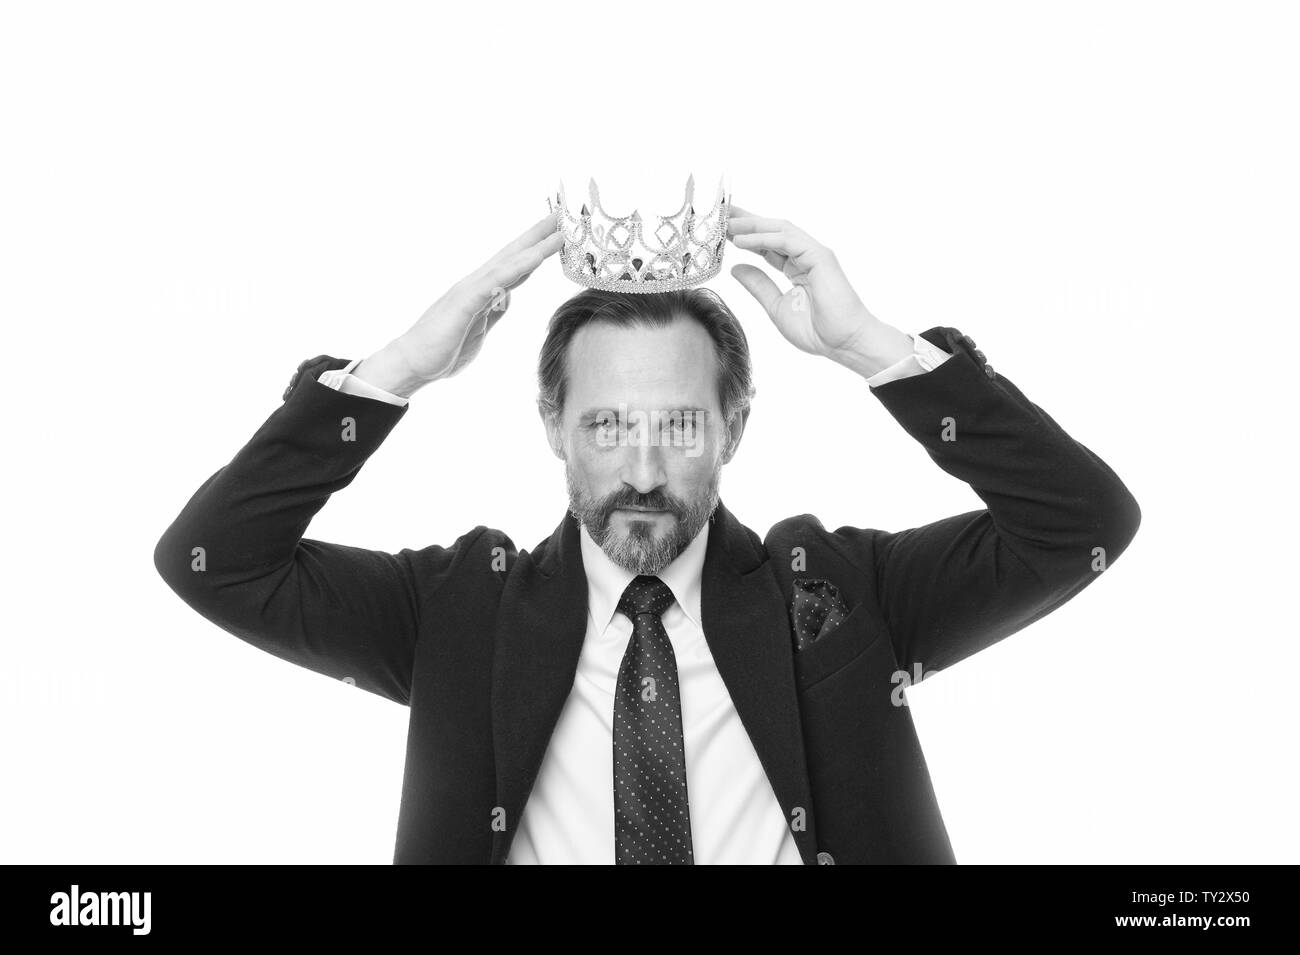 He is noble every inch of him. Mature businessman trying on crown. Fit for a king. Business king. Senior man representing power. Success in business. King of style. Achieving victory and success. Stock Photo